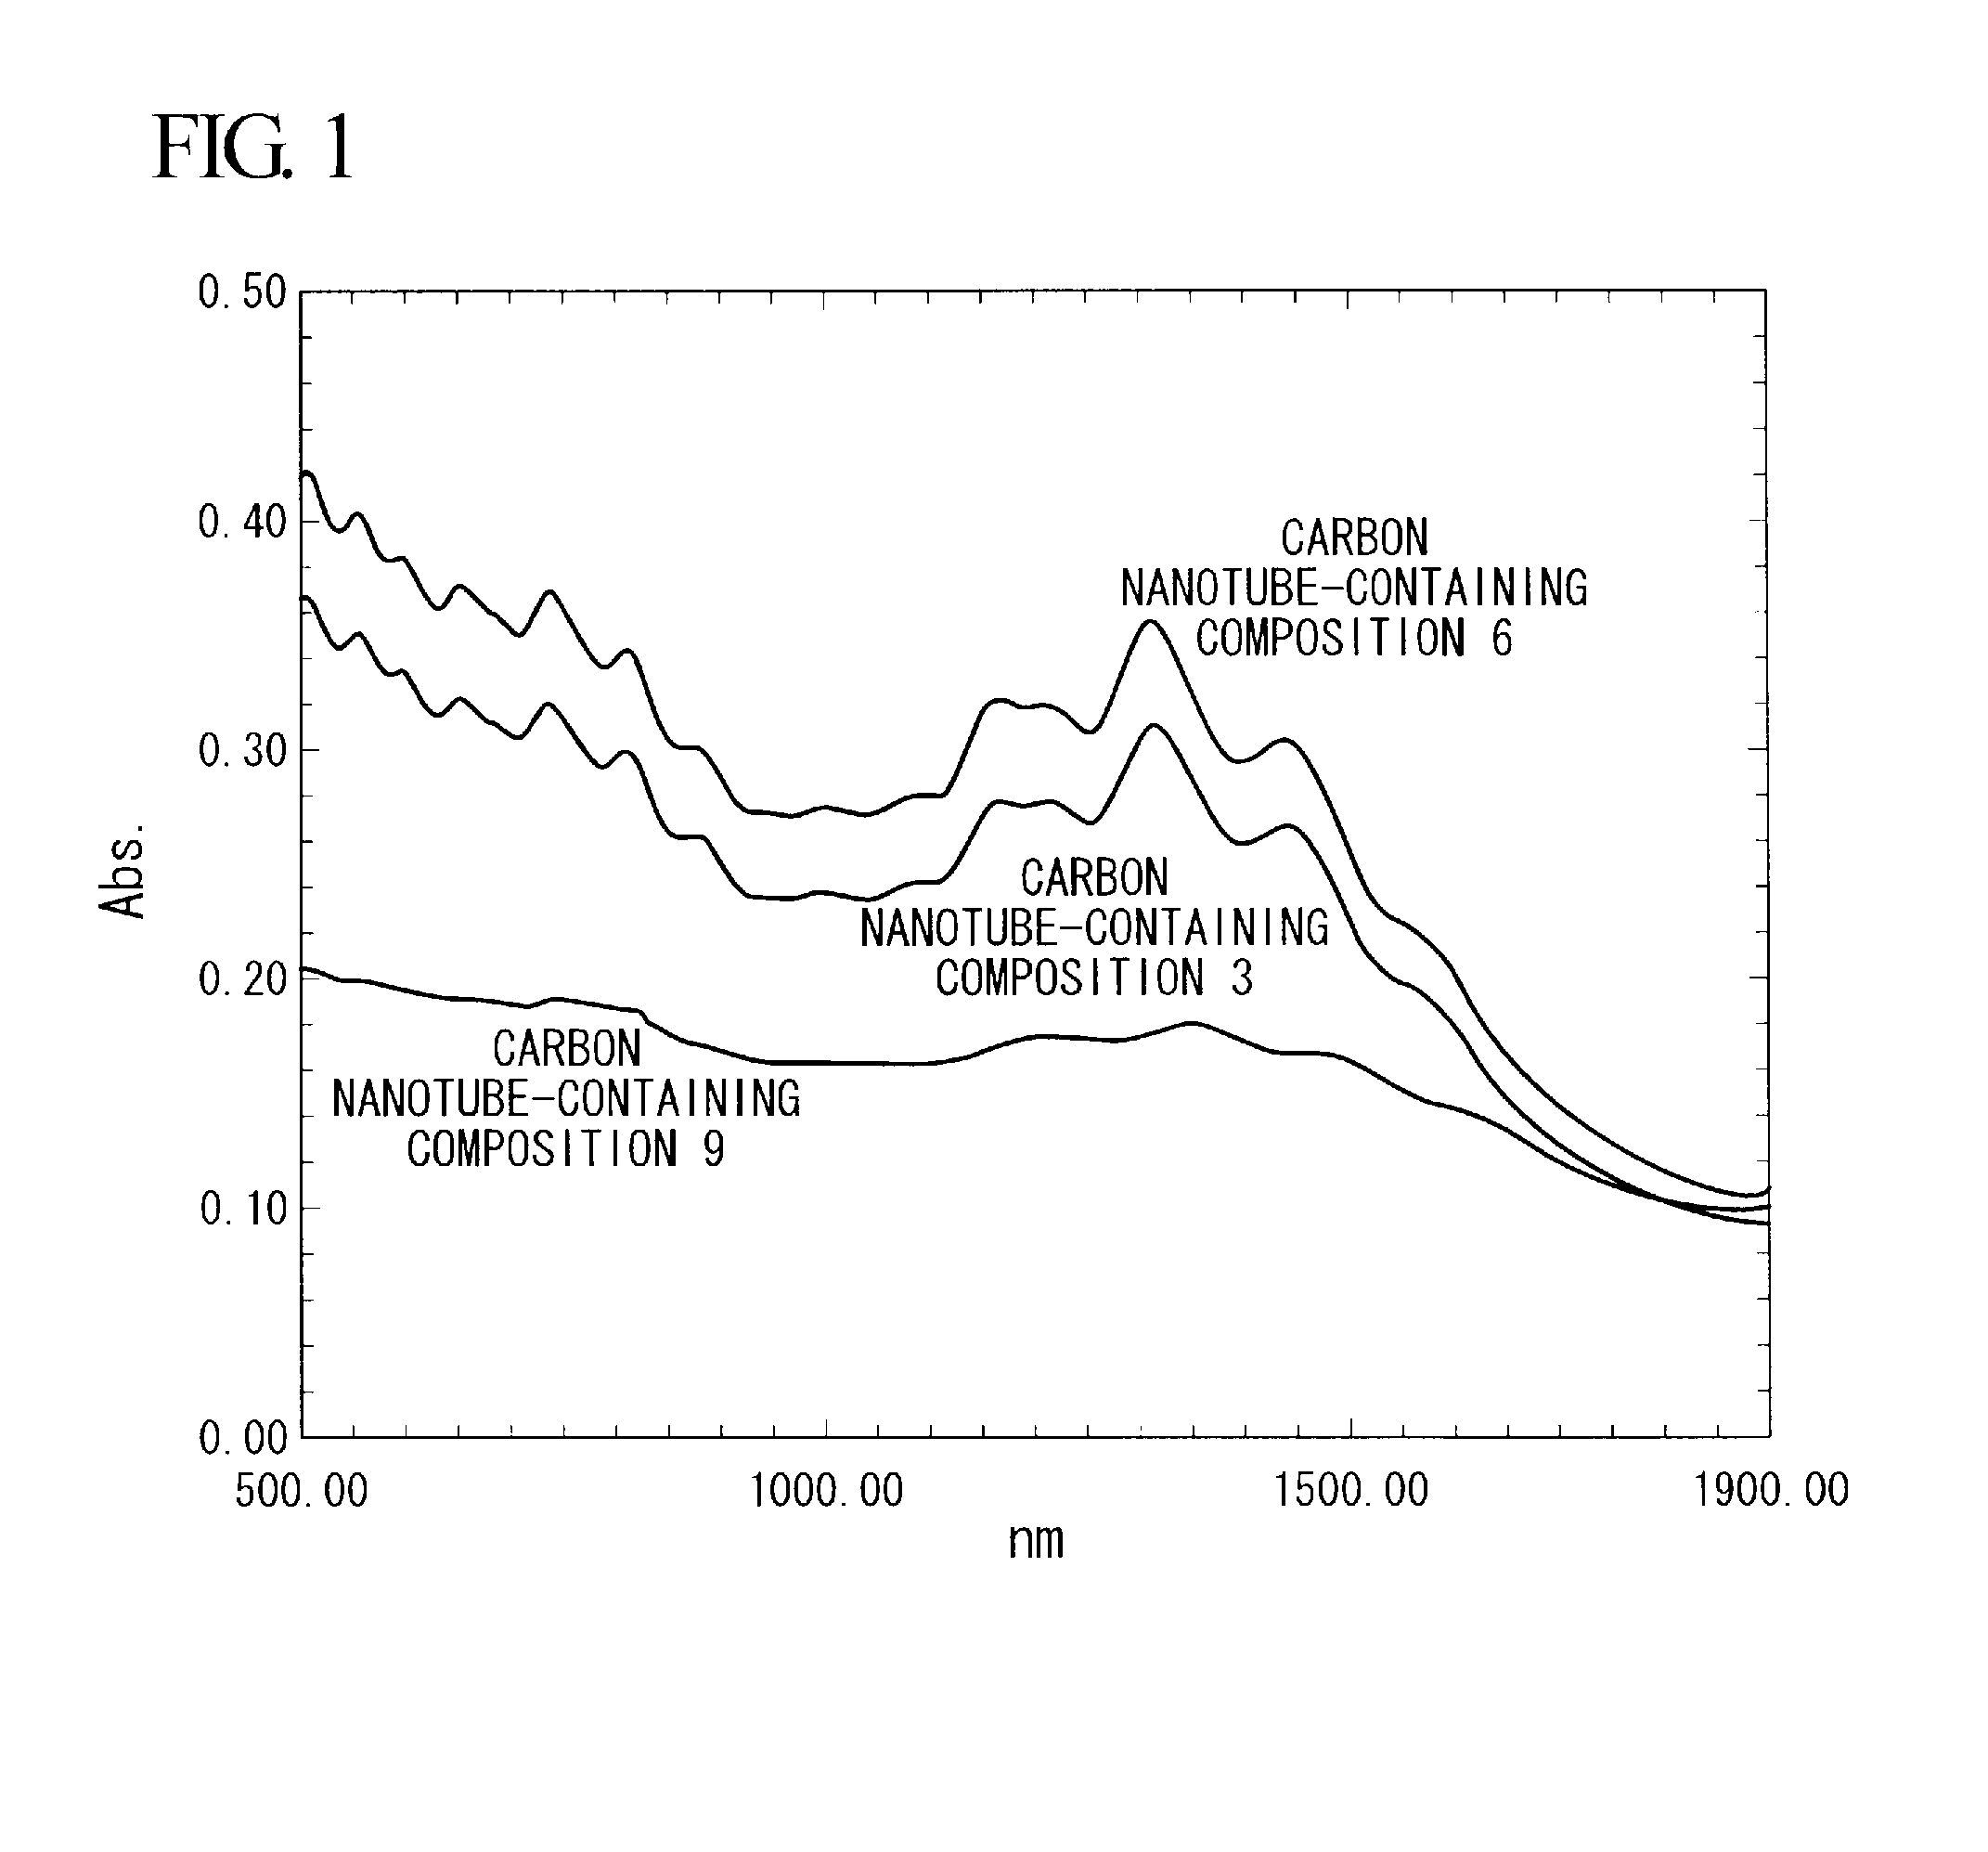 Carbon nanotube-containing composition, composite, and methods for producing them